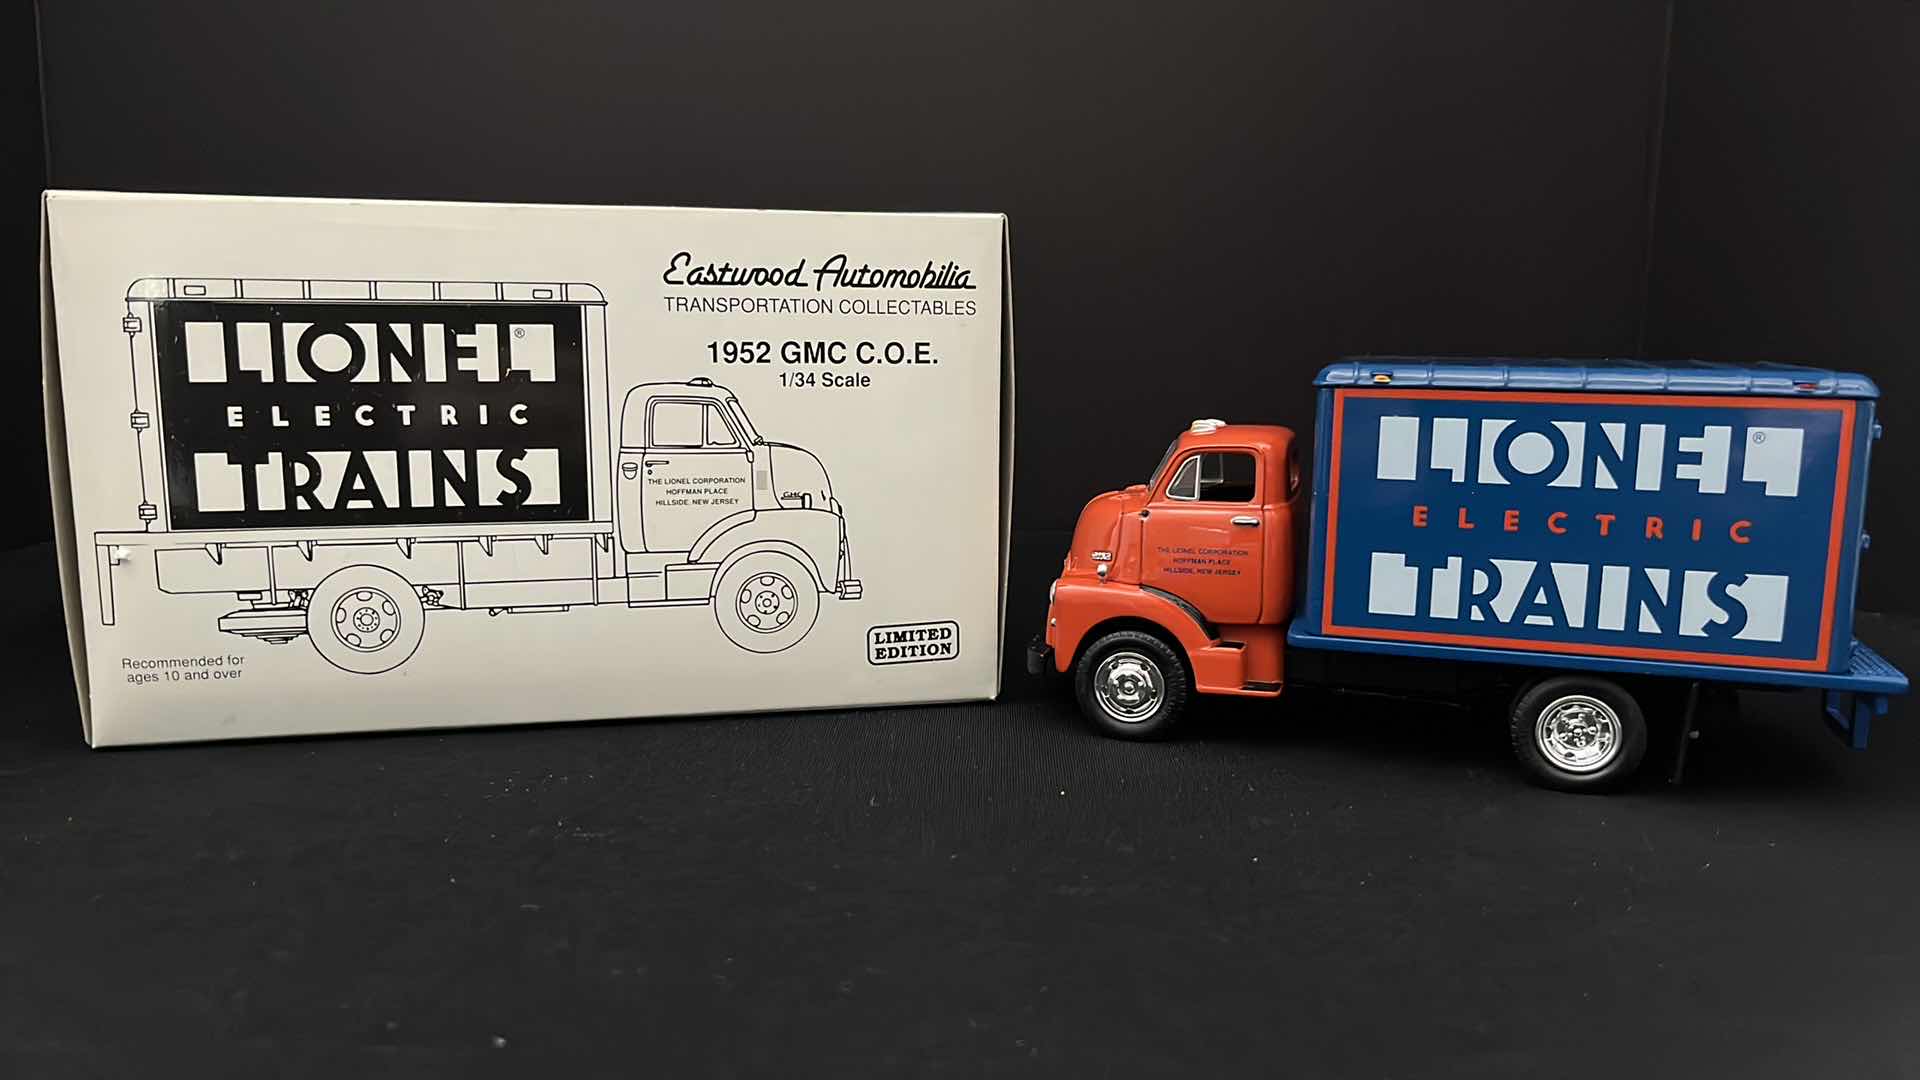 Photo 6 of FIRST GEAR INC, EASTWOOD AUTOMOBILIA TRANSPORTATION COLLECTIBLES LIONEL ELECTRIC TRAINS 1952 GMC C.O.E. STOCK NO 19-0108